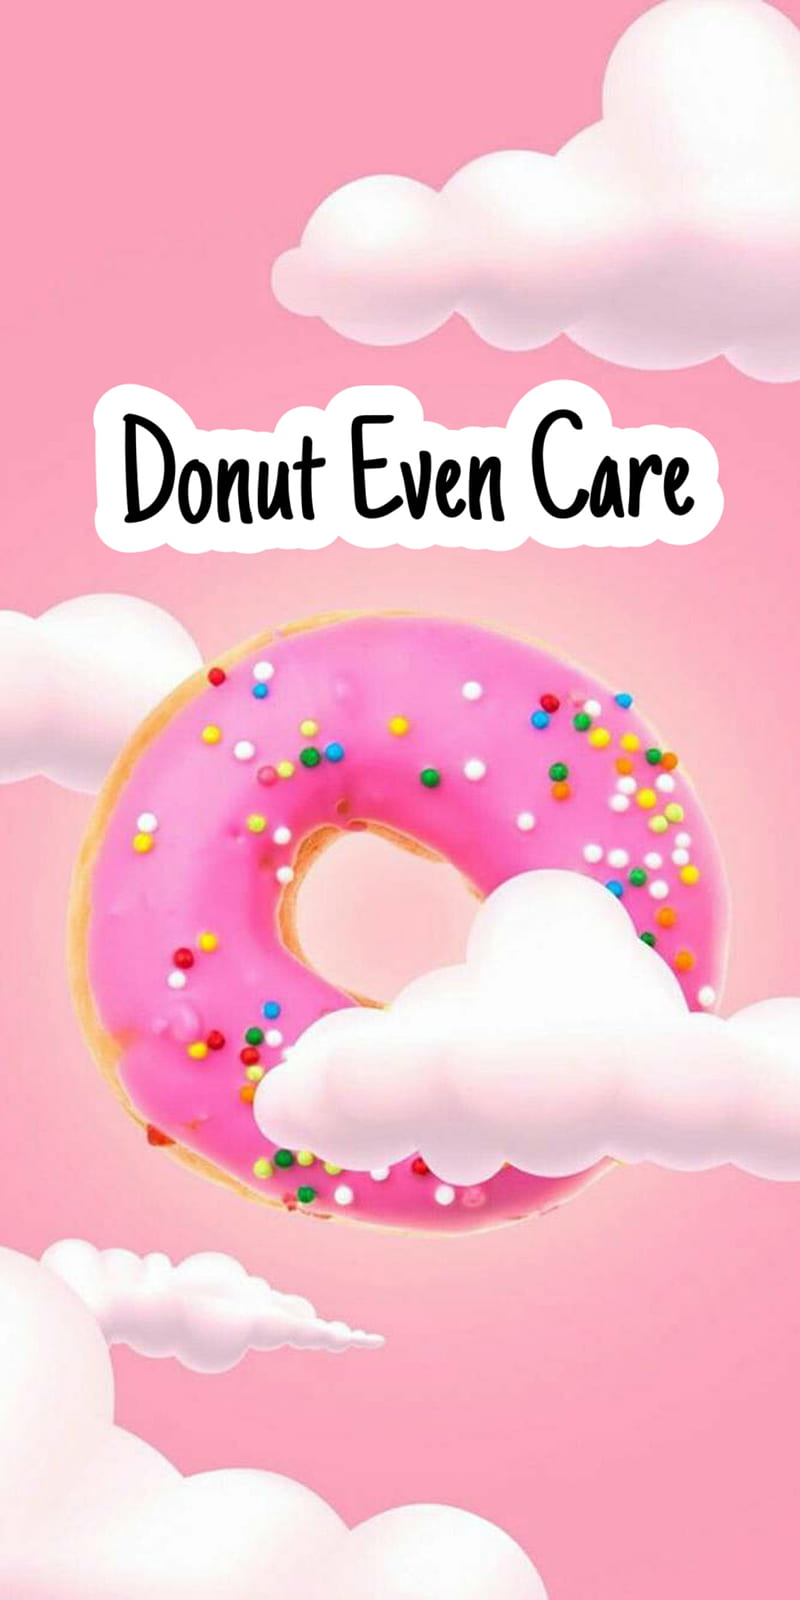 7 Donut wallpapers ideas  donuts iphone wallpaper iphone background